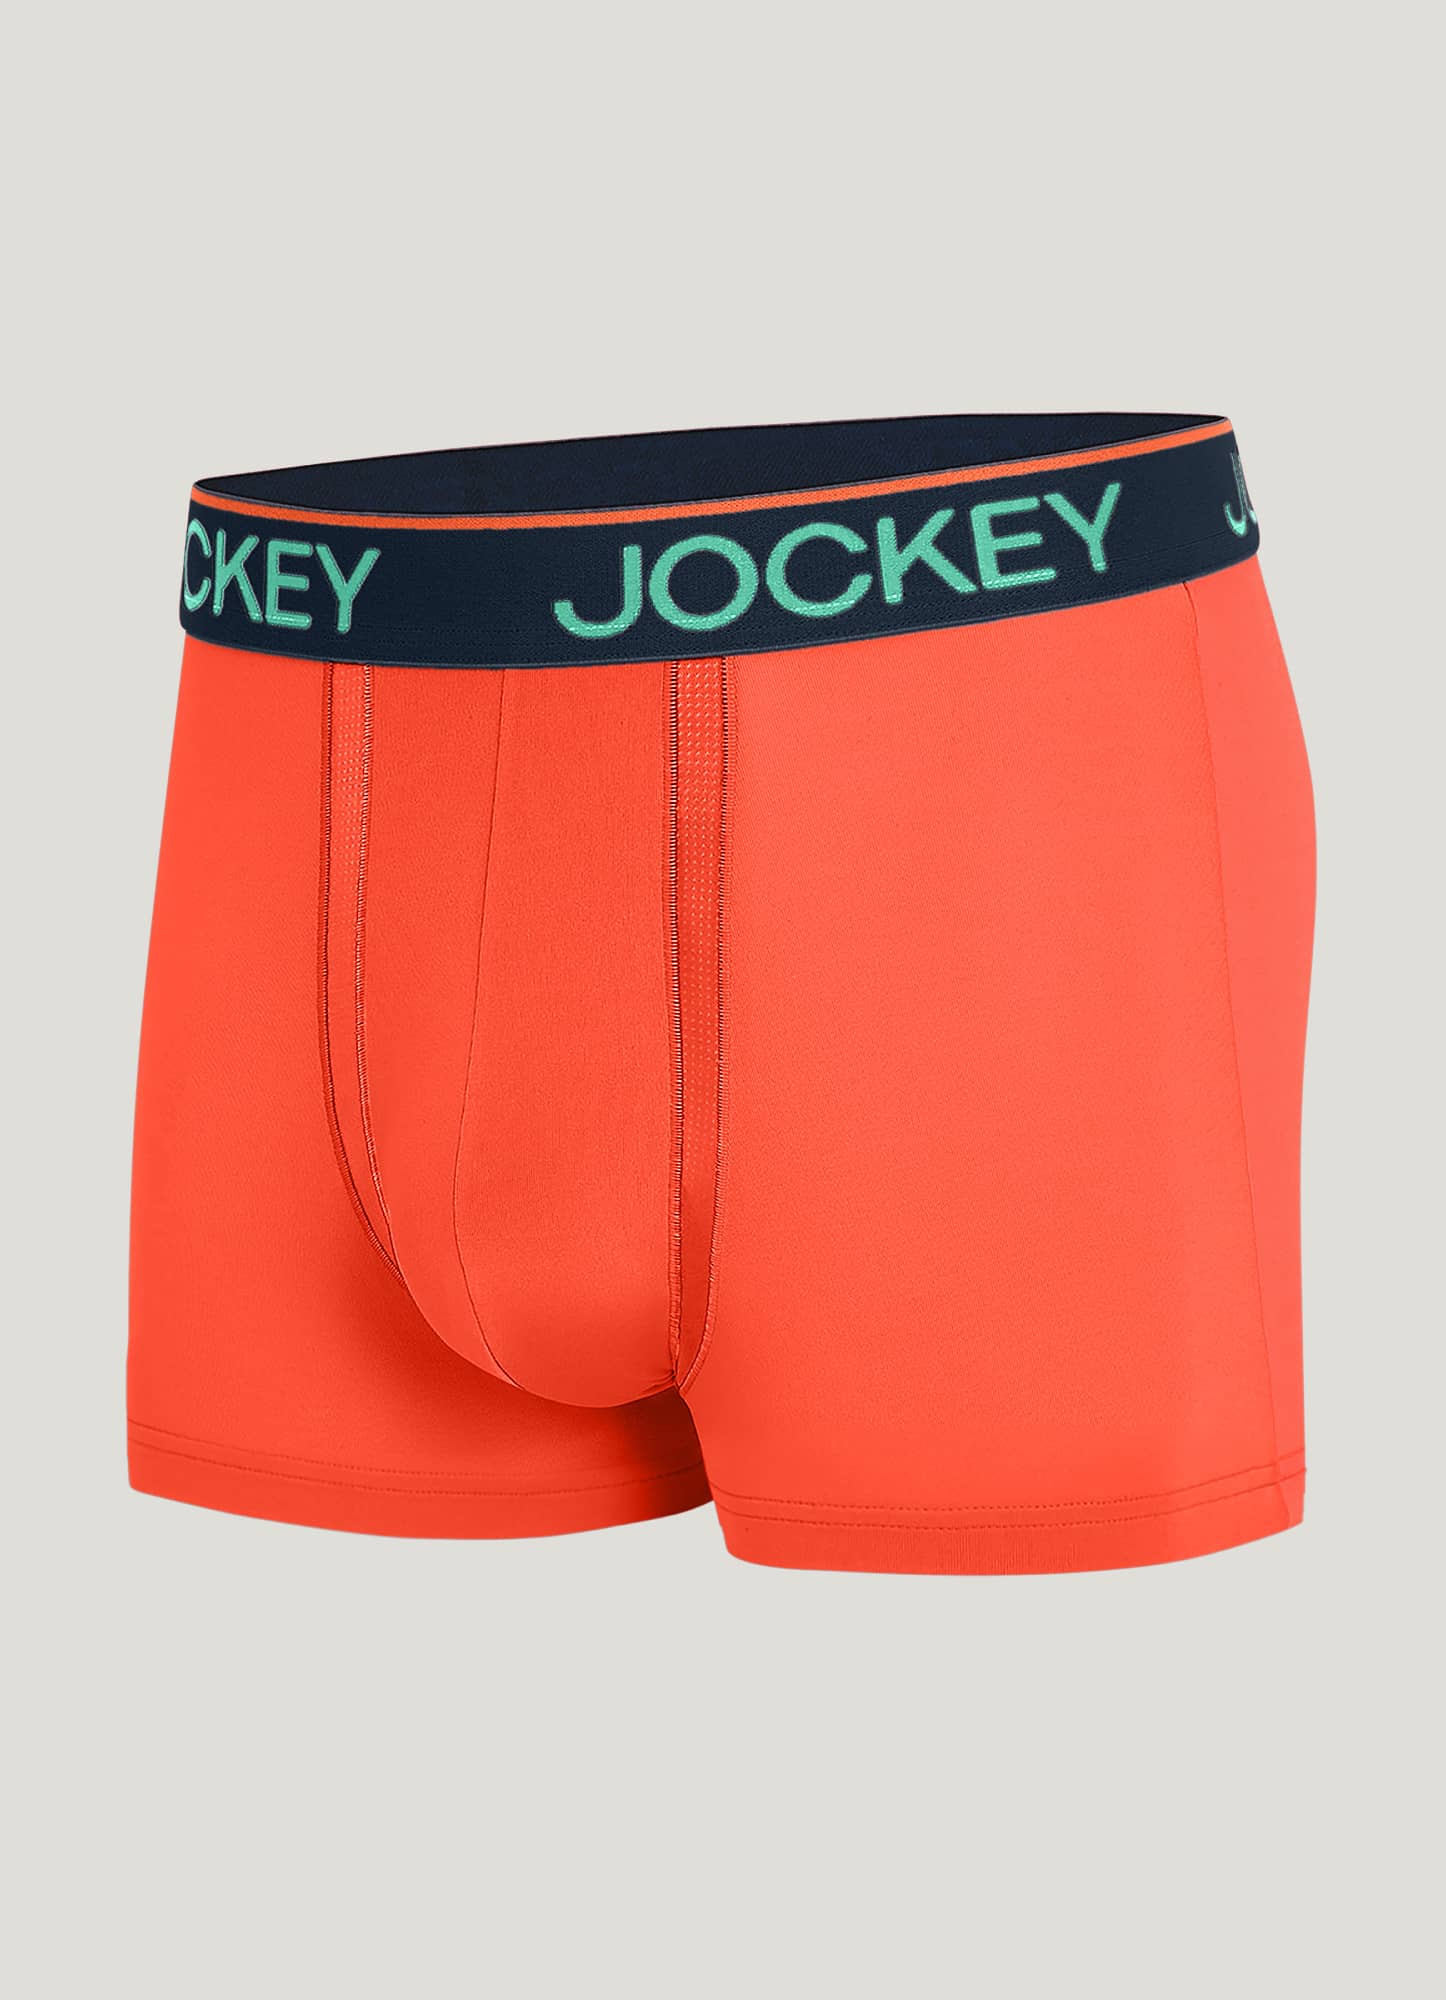 Jockey 2-Pack Chafe Proof Pouch Microfibre Boxer Briefs - Mens